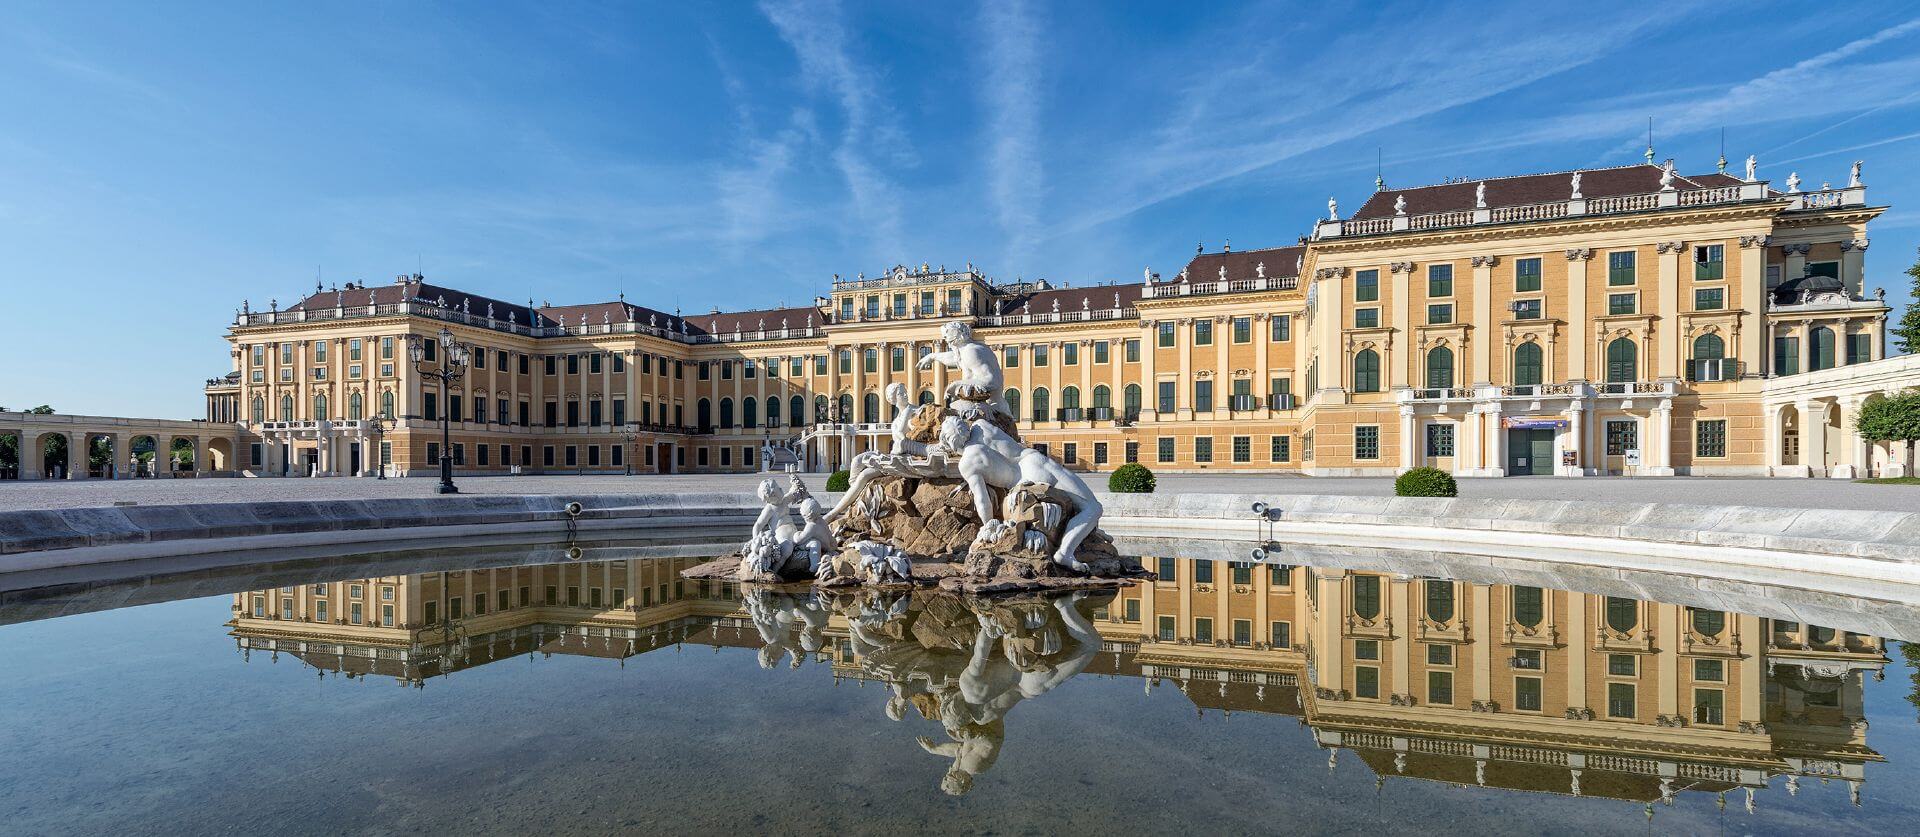 Amazing Schönbrunn Palace Pictures & Backgrounds